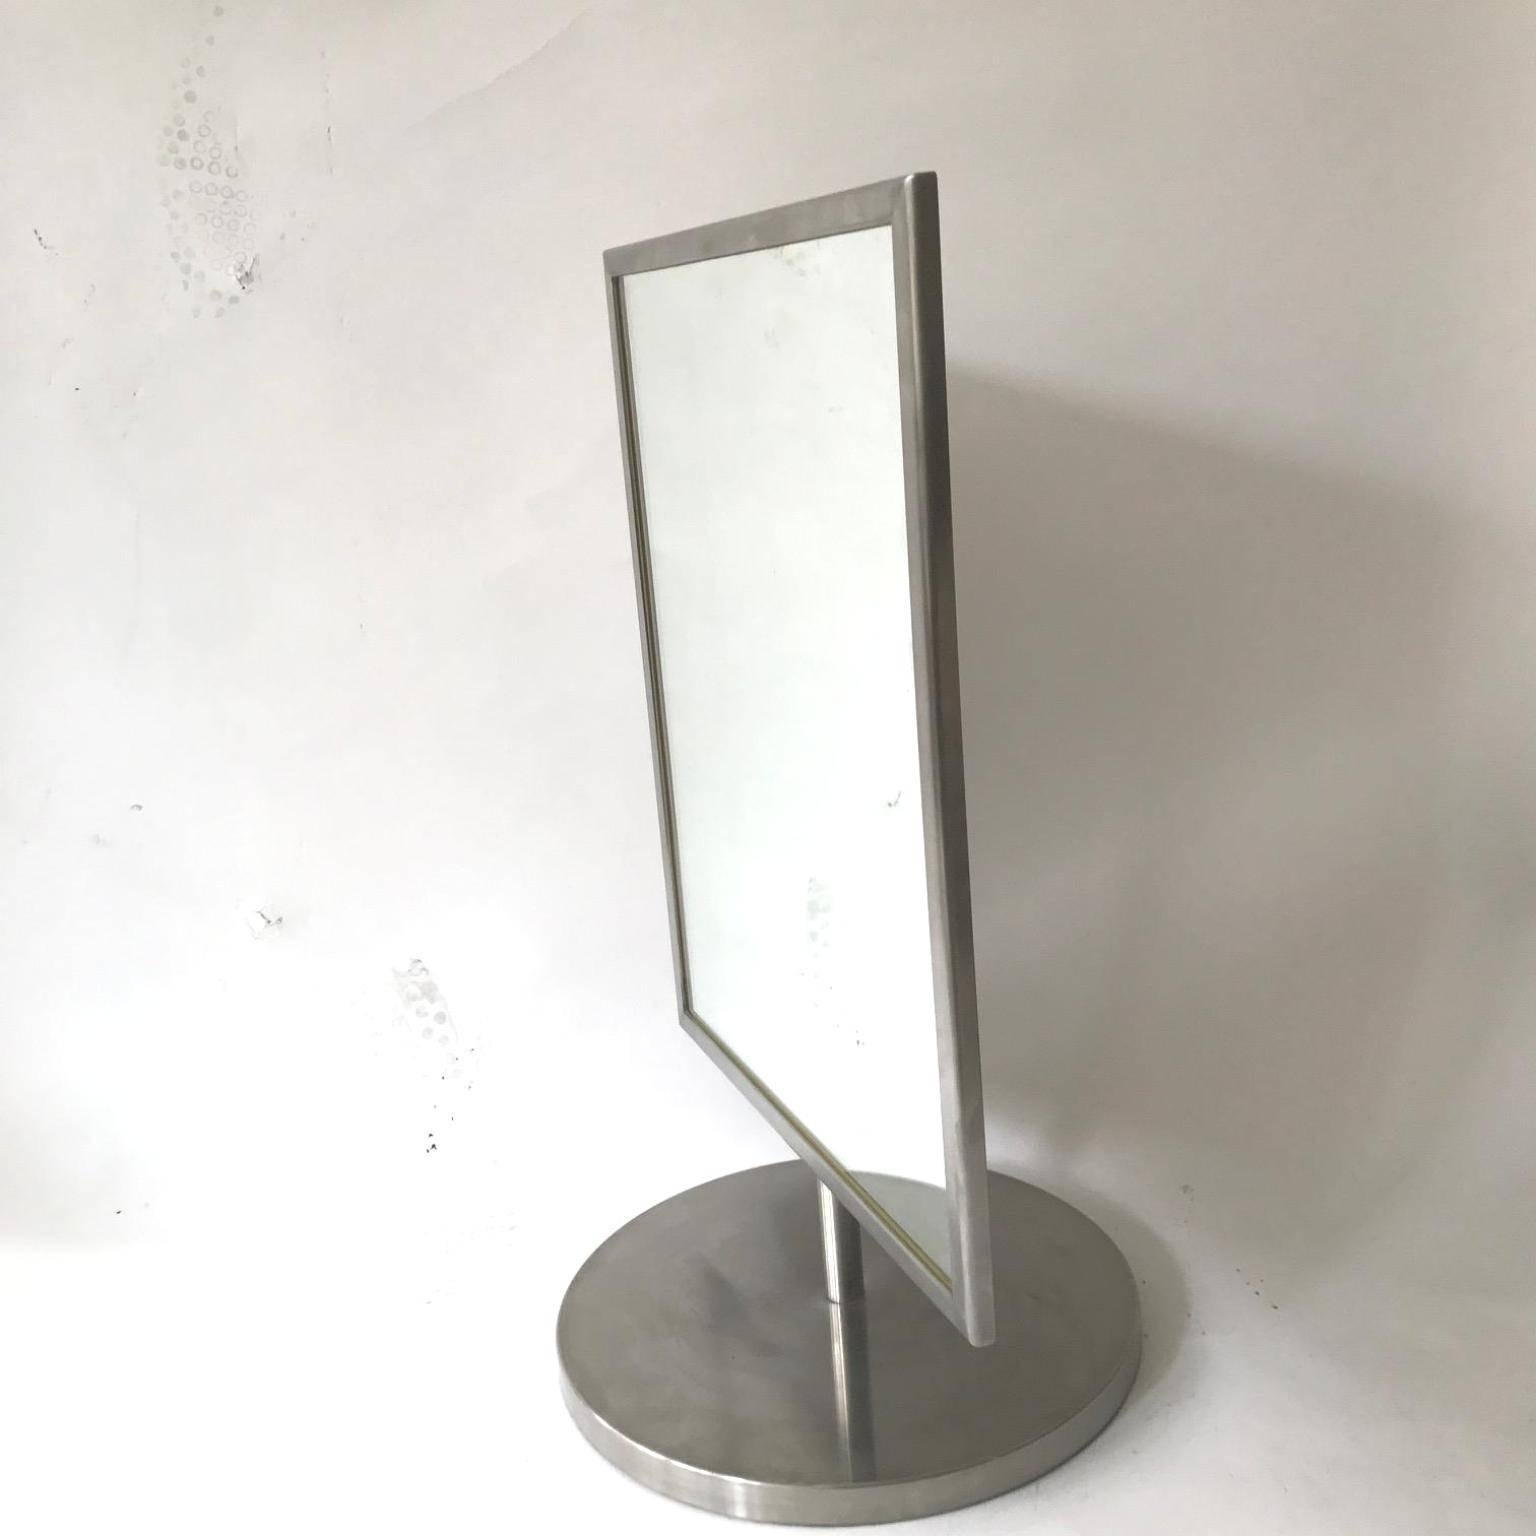 These two vanity swivel mirrors in polished steel frame and the base. Italian, circa 1970s. Would be perfect as a pair on the vanity table but can be separated and purchase just a one.